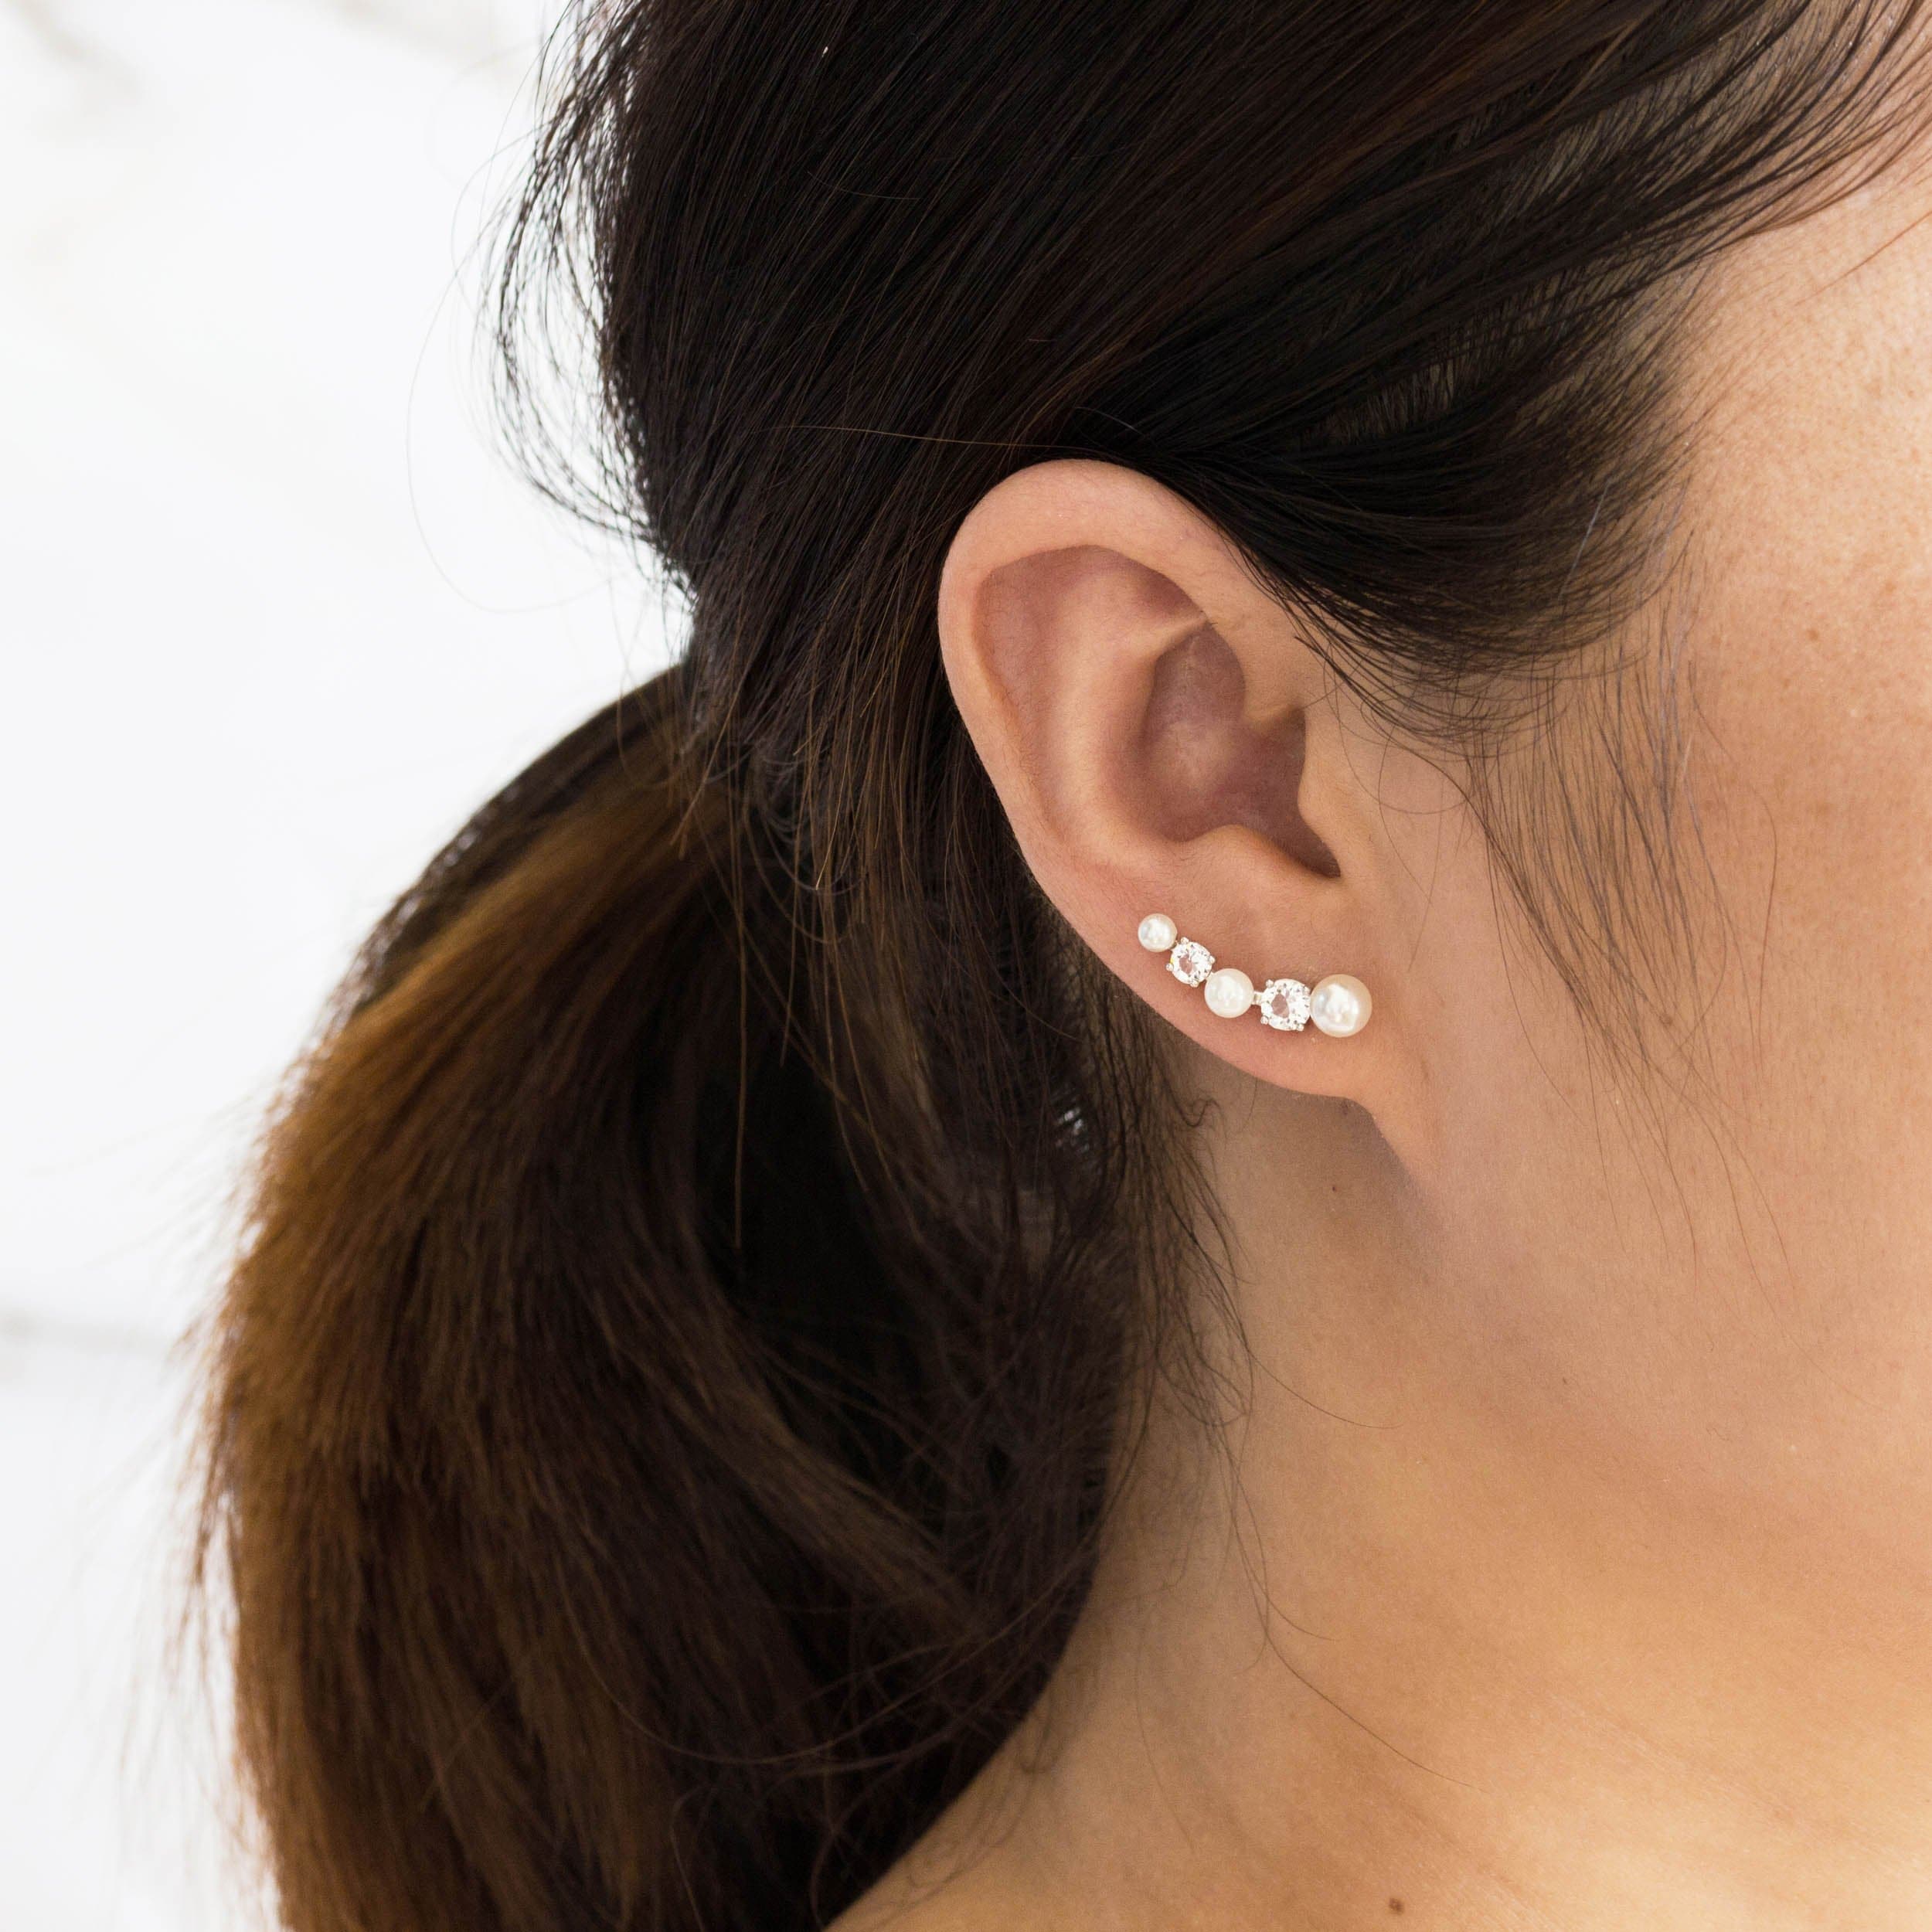 White Pearl Climber Earrings Created with Zircondia® Crystals